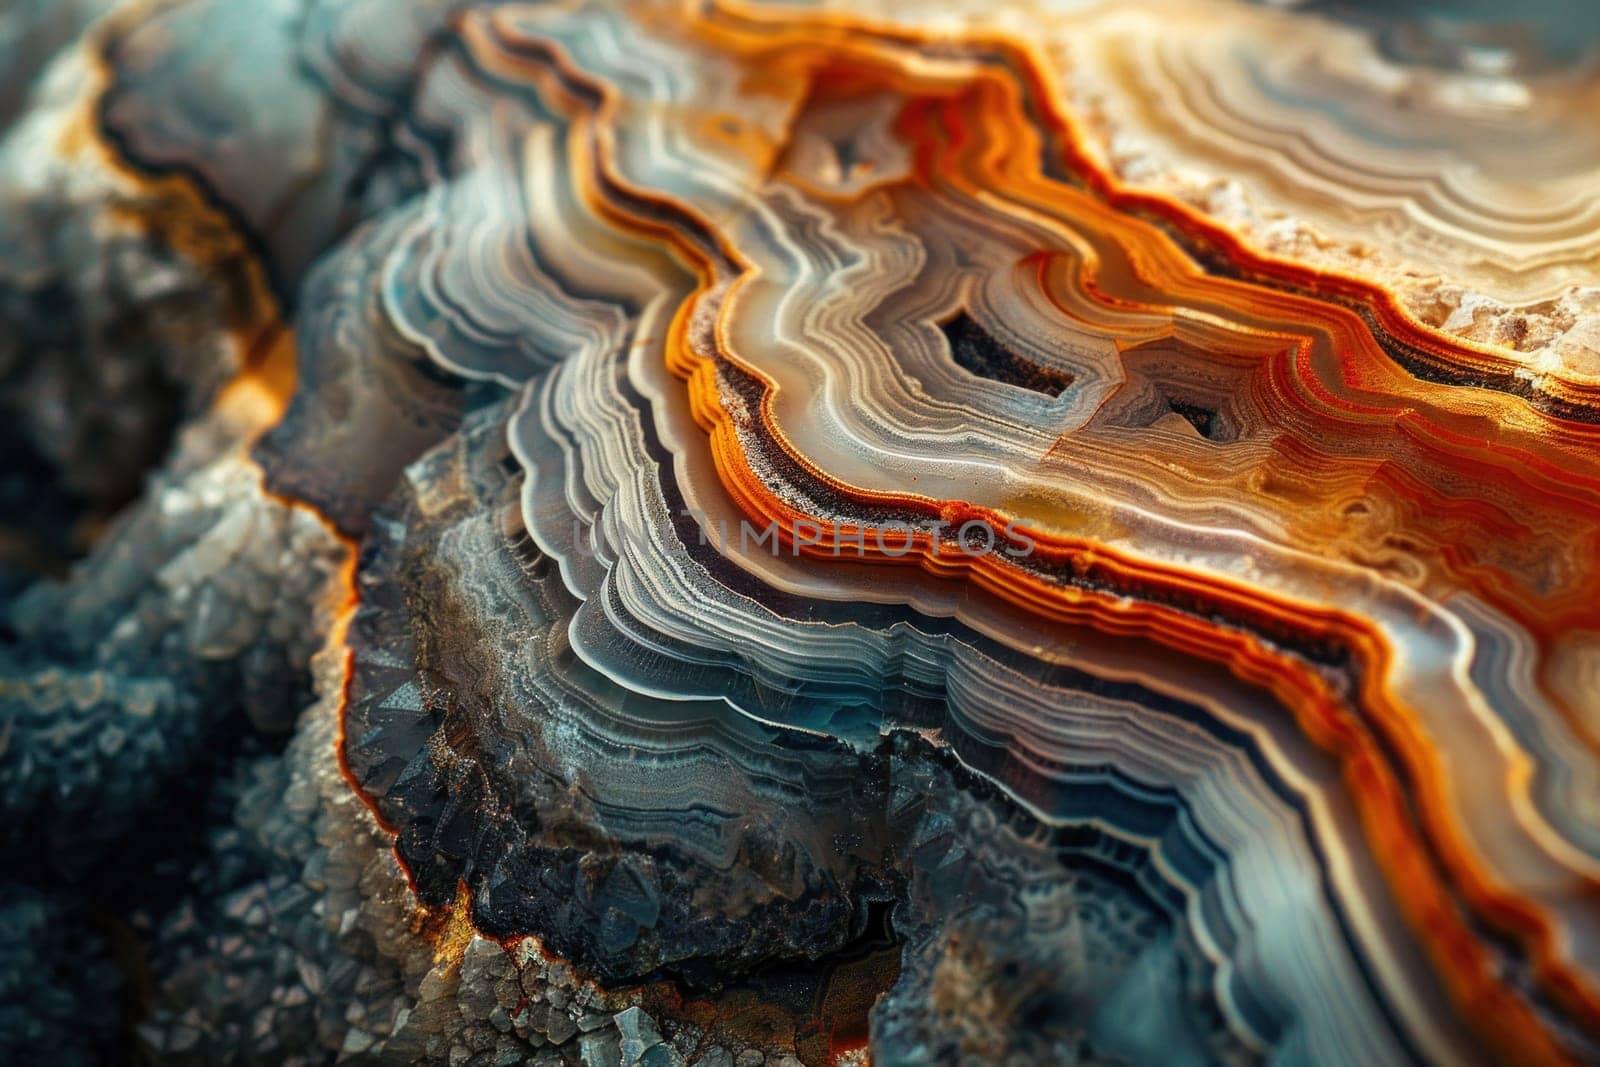 Colorful patterned rock close up view of nature's artwork with vibrant and intricate details